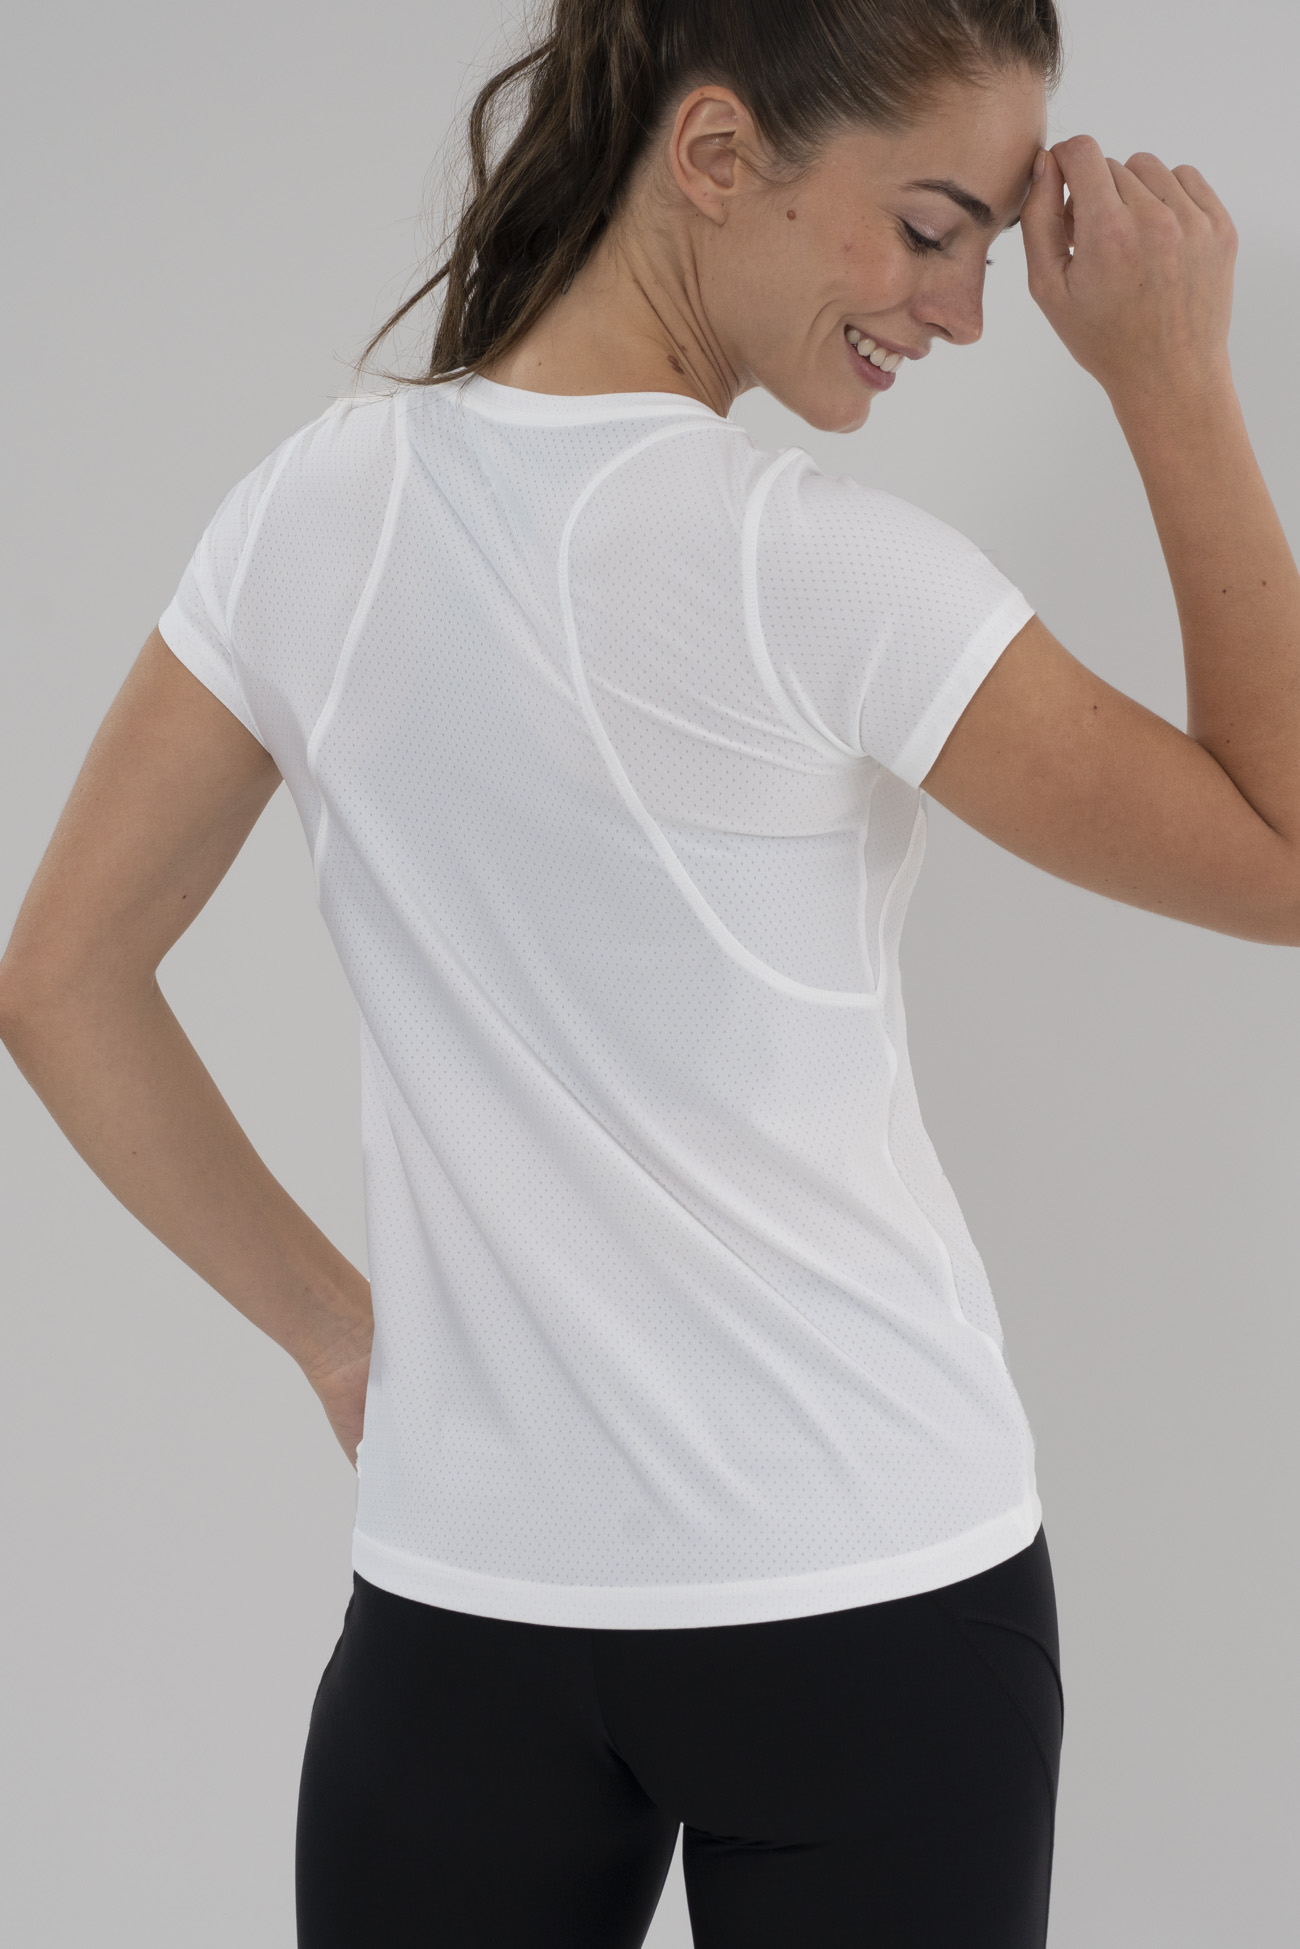 gymco_blusa-soft-power-basic_44-01-2023__picture-1604